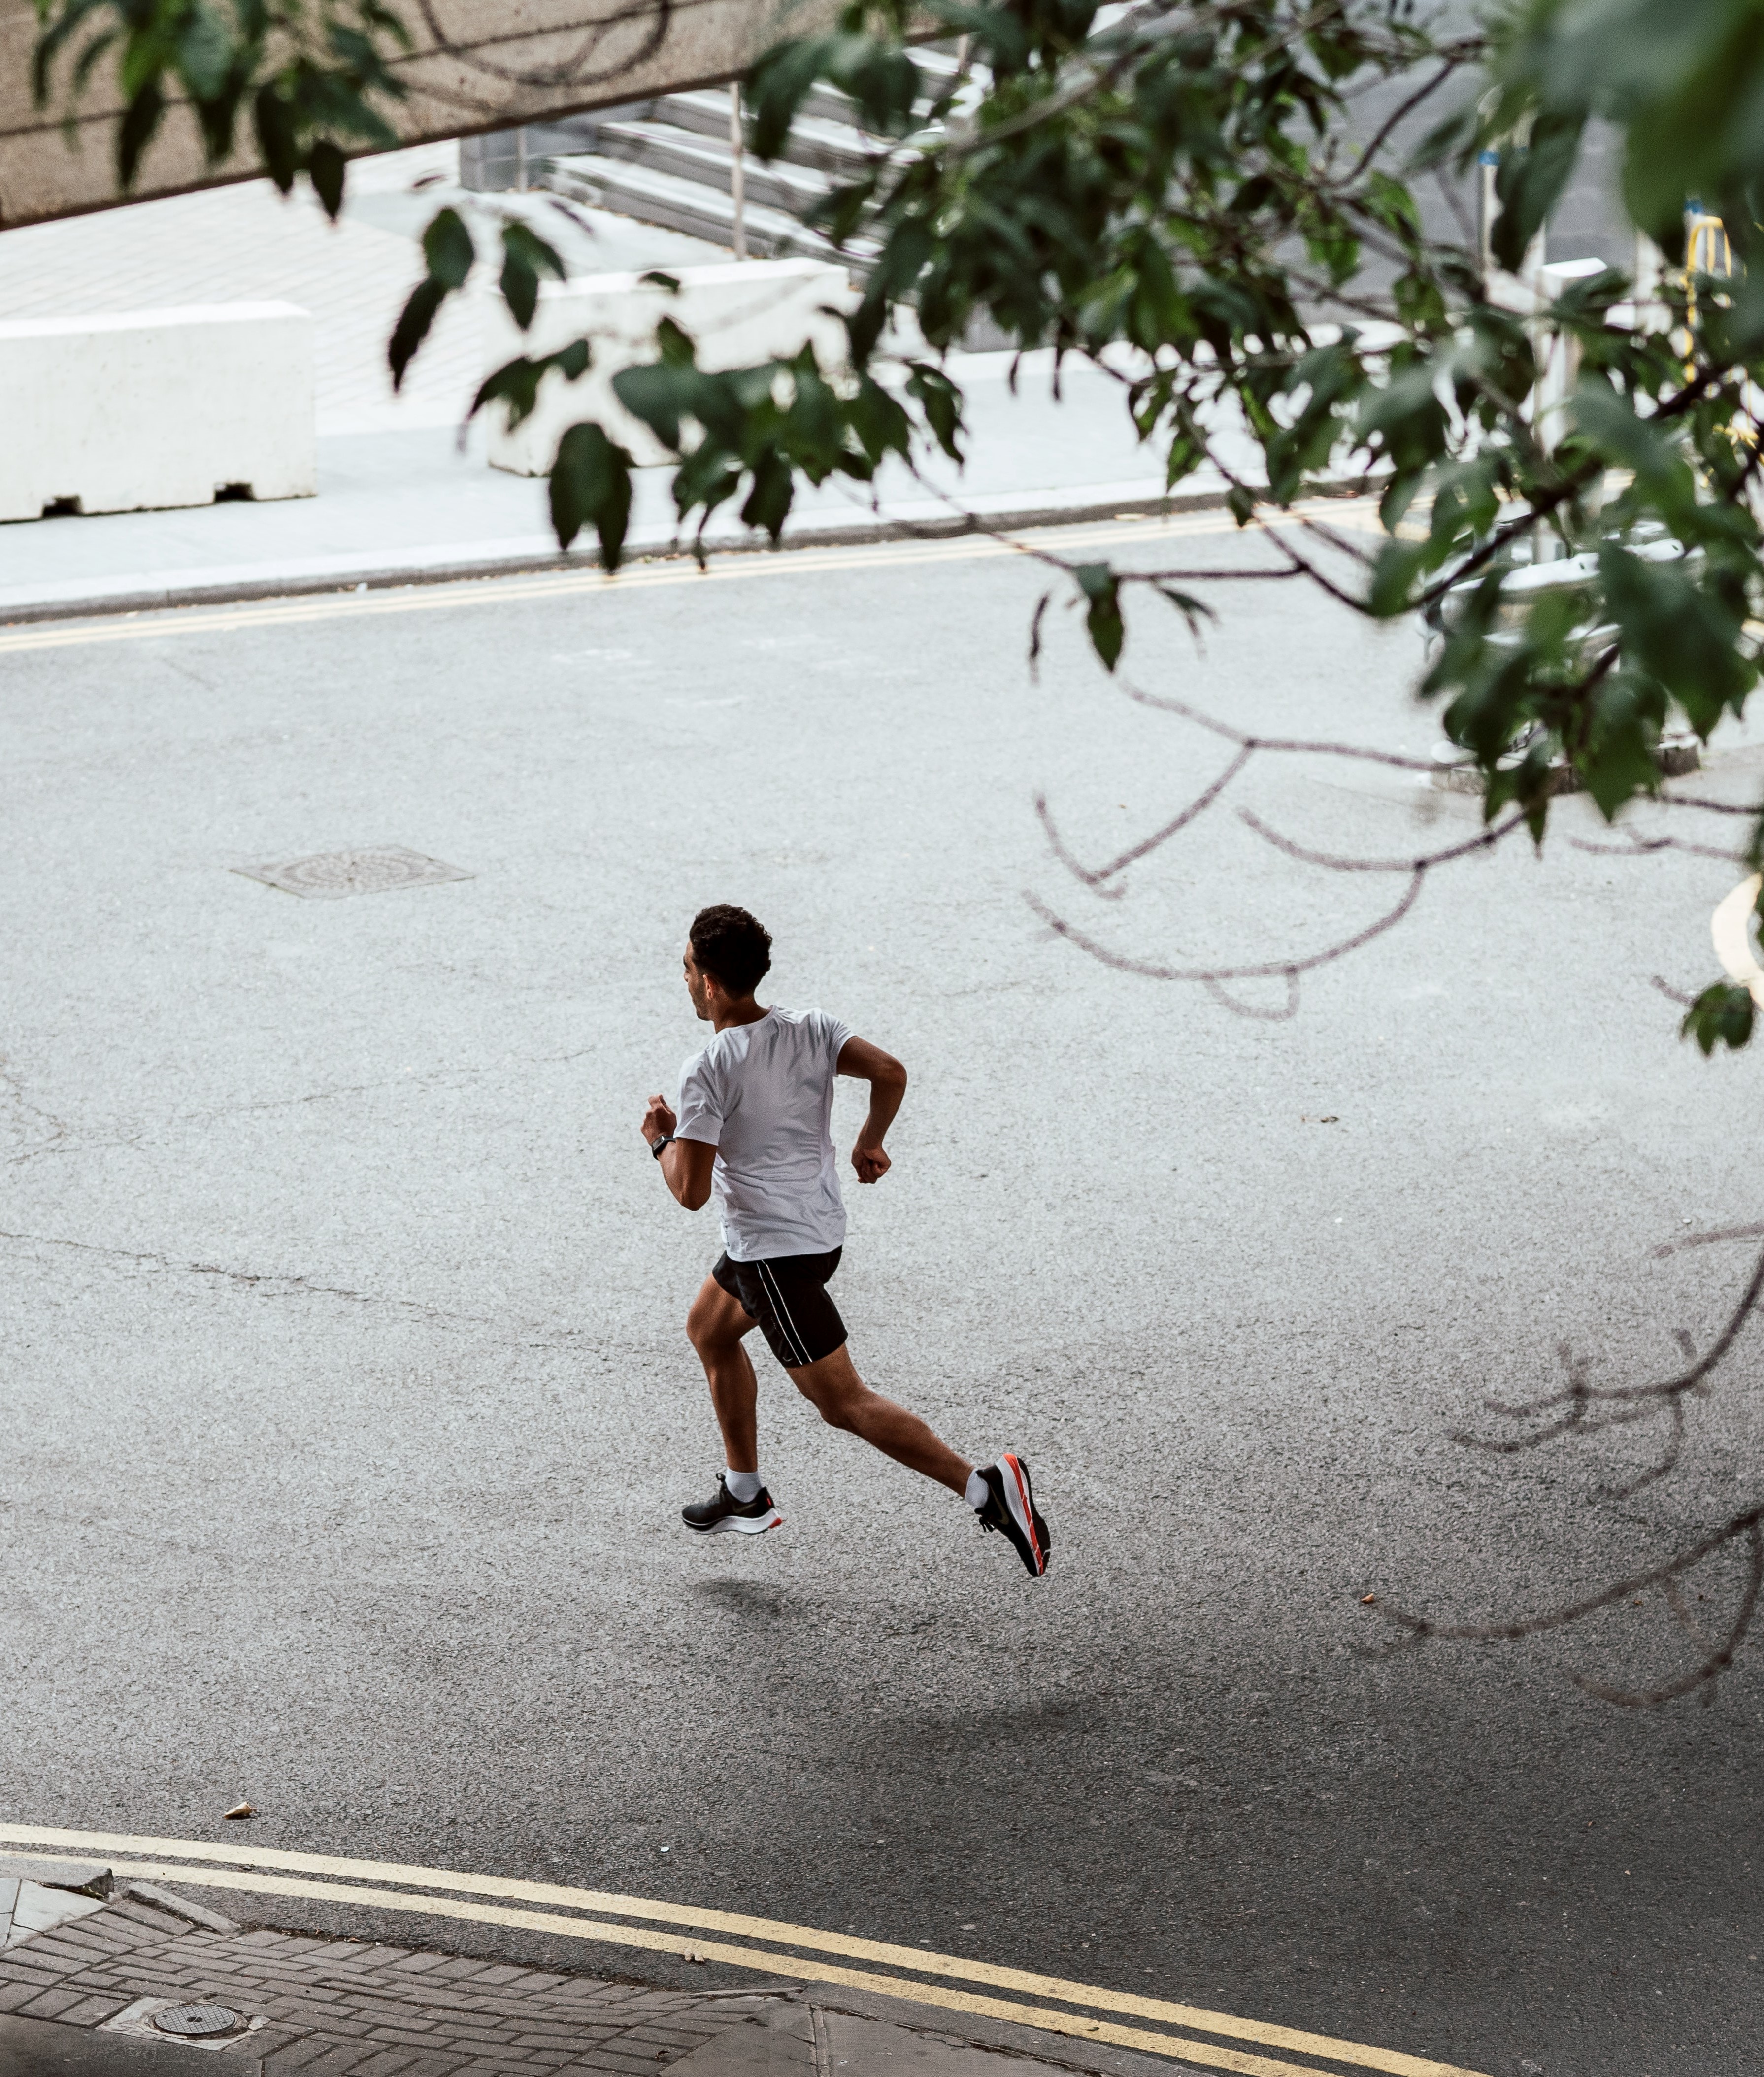 Running correctly: 4 tips for amateur athletes